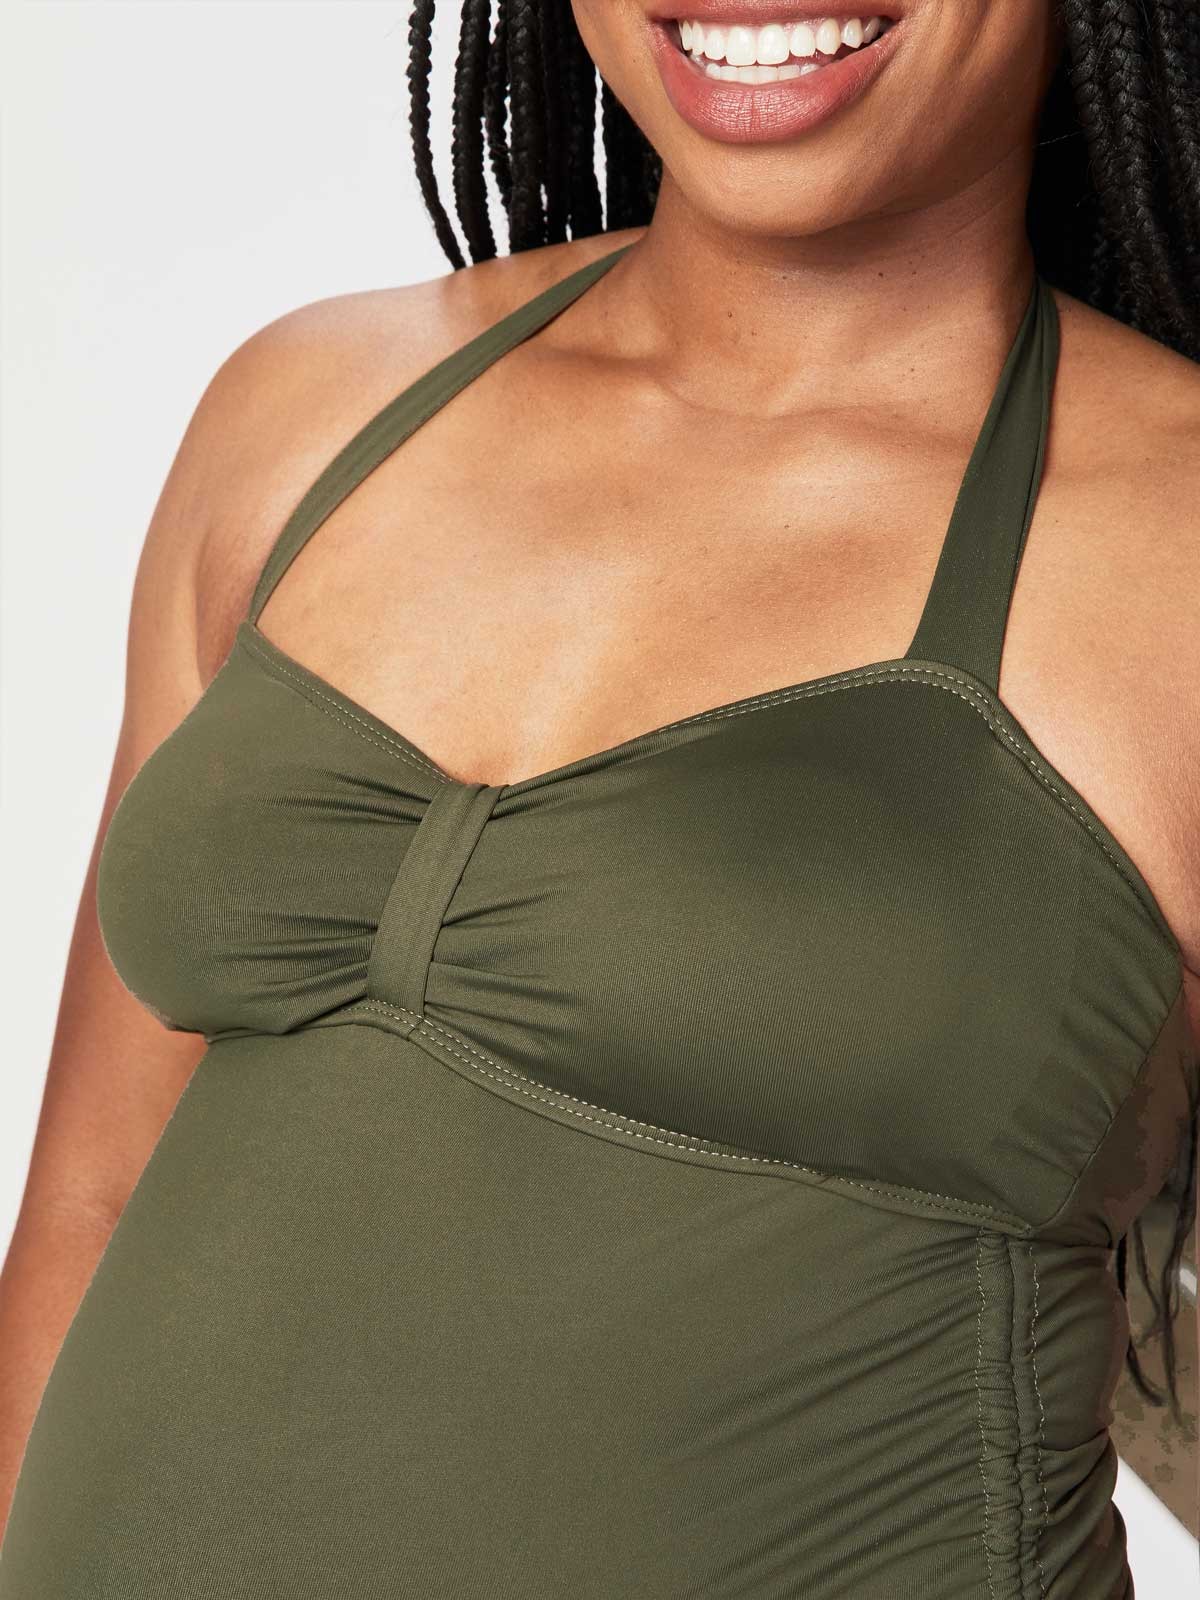 Army Green Maternity Tank Top & Ruched Nursing Dress, Women's Fashion,  Maternity wear on Carousell